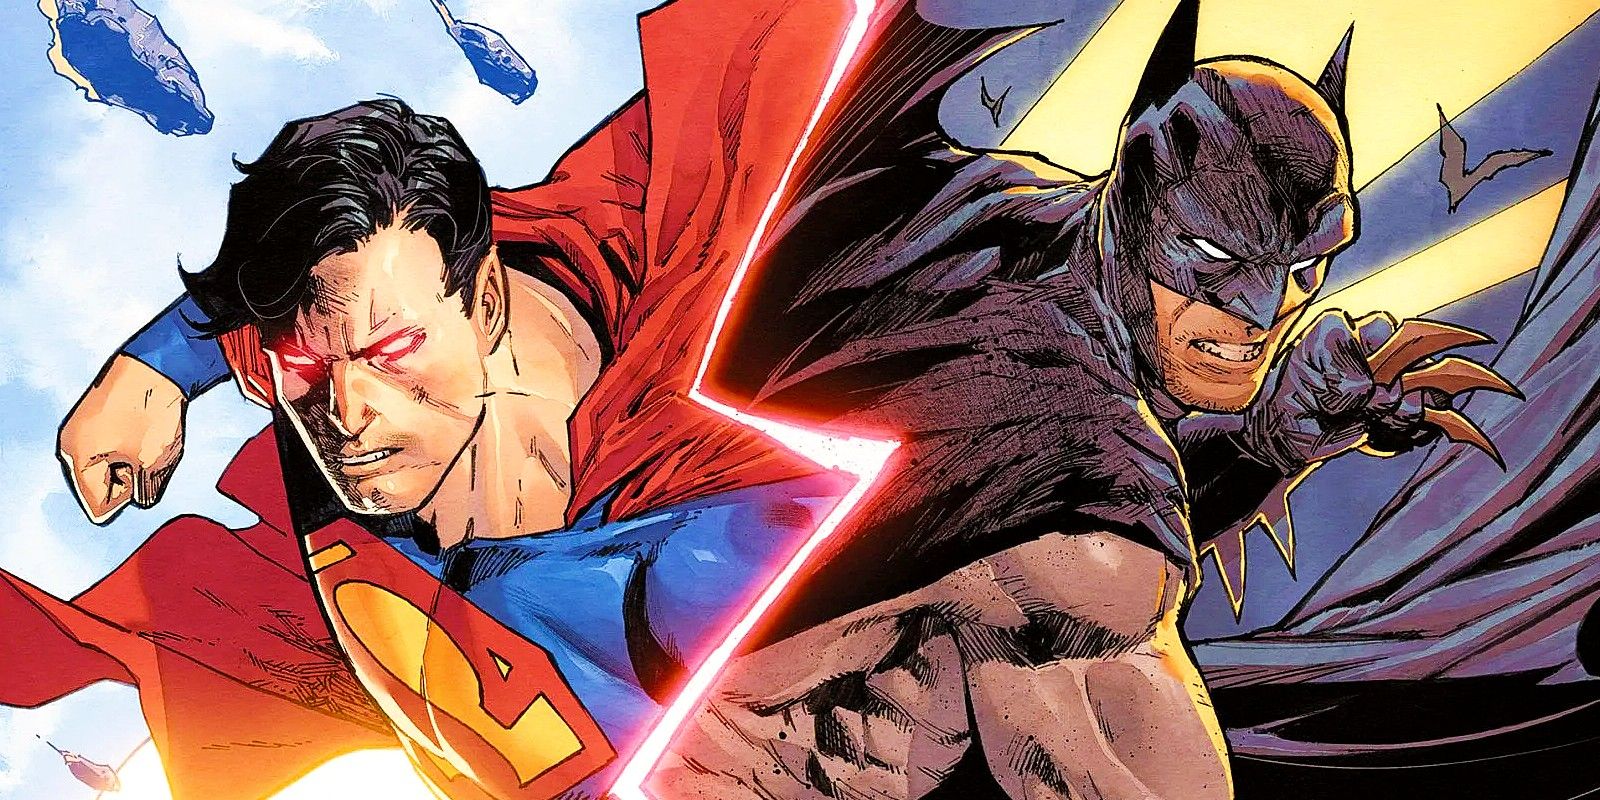 Featured Image: Superman (left) and Batman (right)